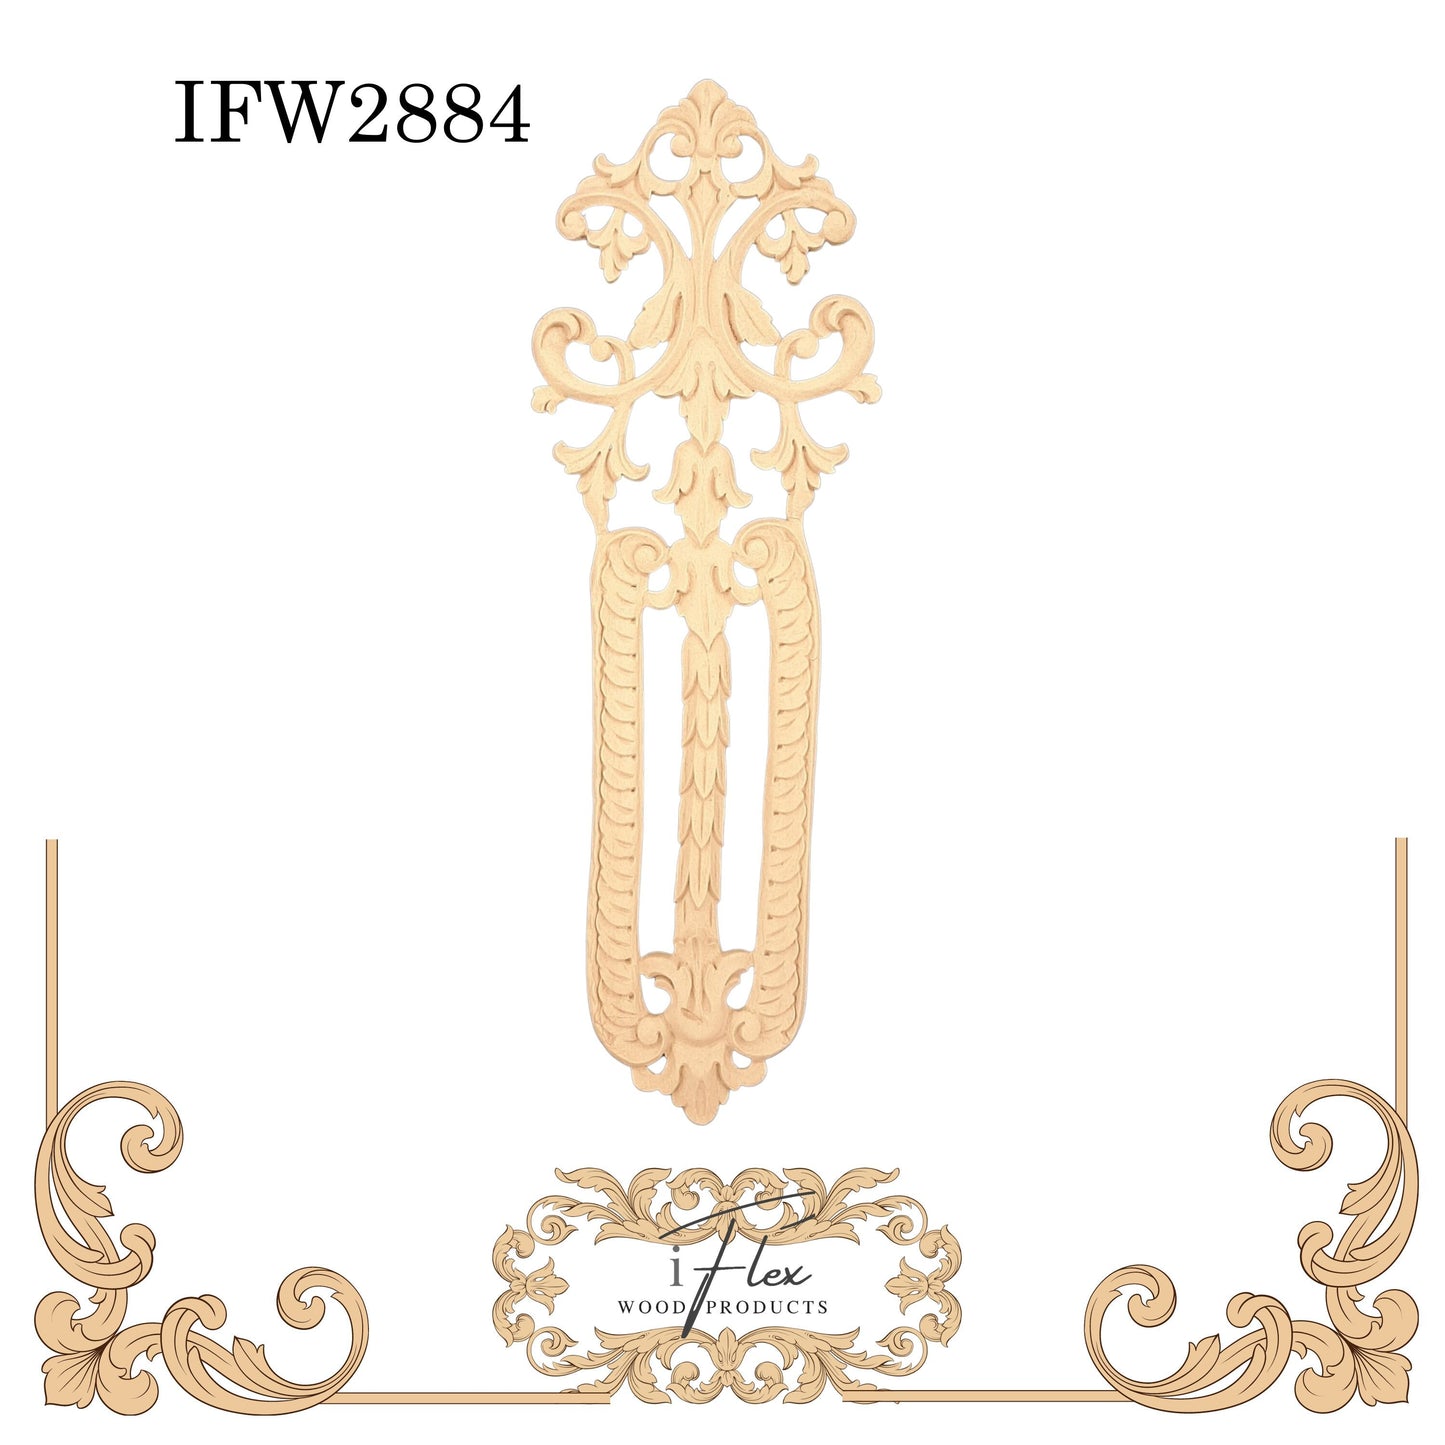 IFW 2884 iFlex Wood Products, bendable mouldings, flexible, wooden appliques, drop